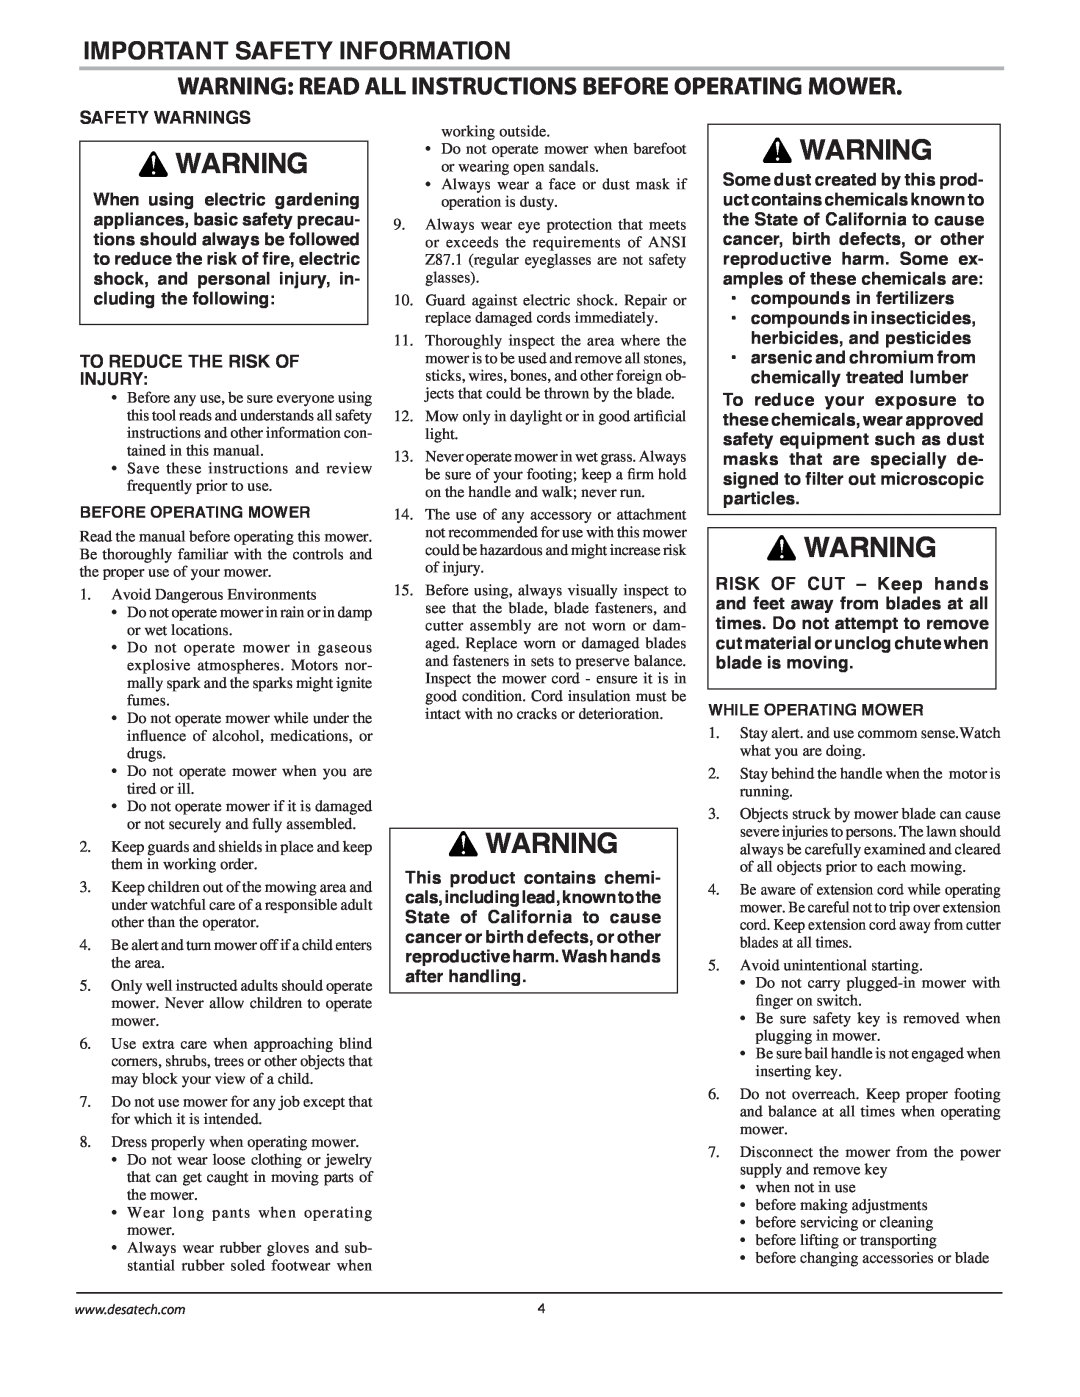 Remington Power Tools MPS6017A manual Important Safety Information, Warning Read All Instructions Before Operating Mower 